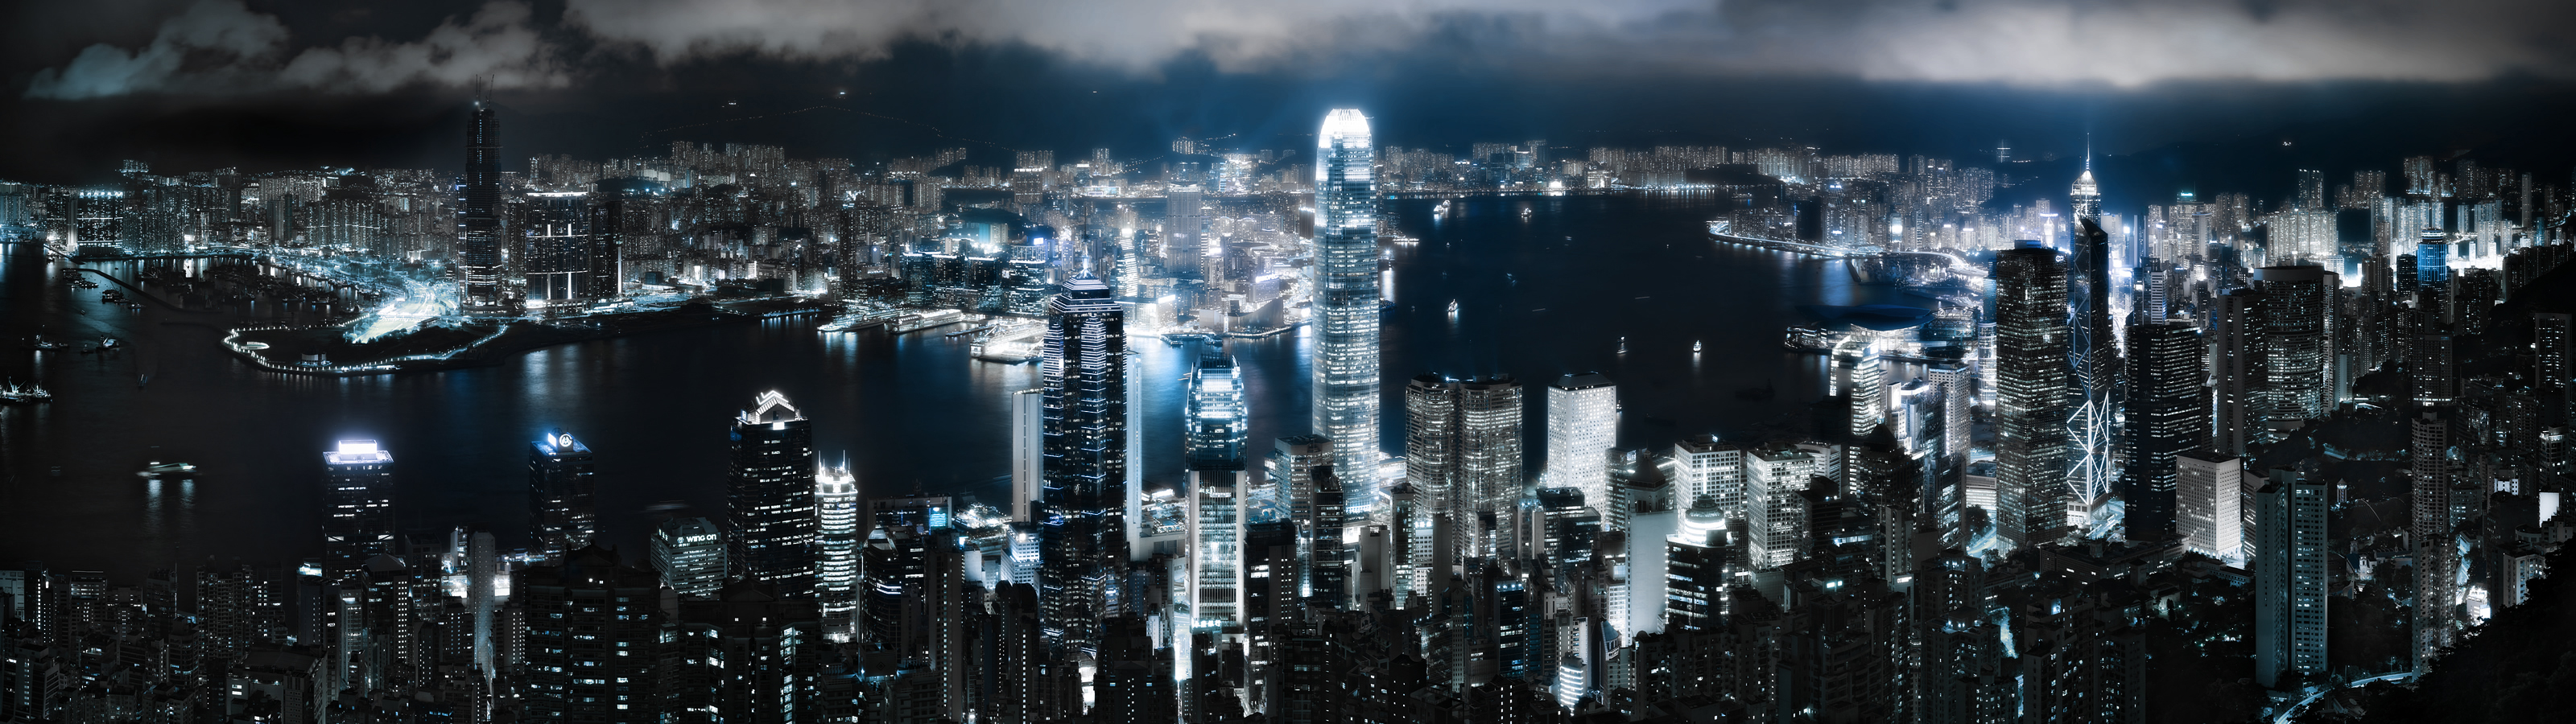 Blue skyline of Hong Kong cityscape with skyscrapers as a stunning desktop wallpaper view.